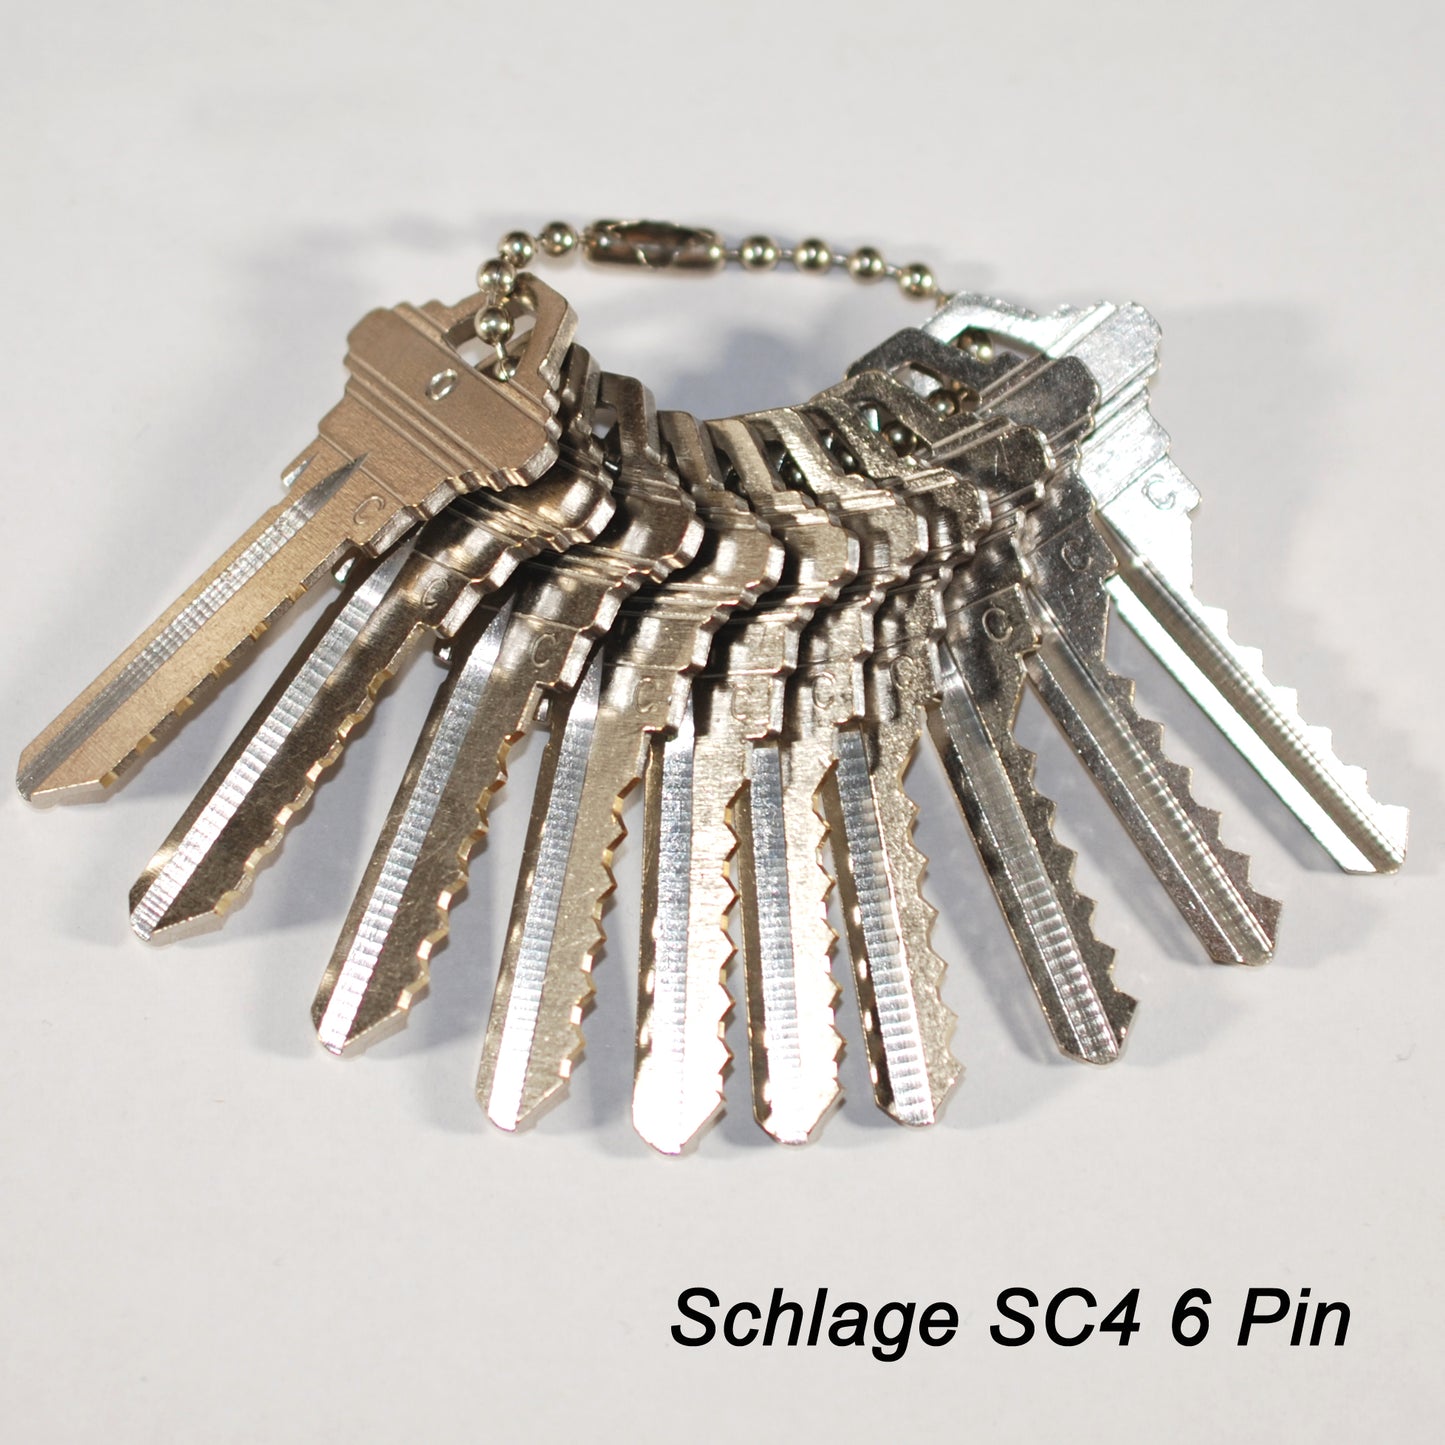 Schlage SC4 ~ 6 Pin Space and Depth Keys ~ DSD#060, C45